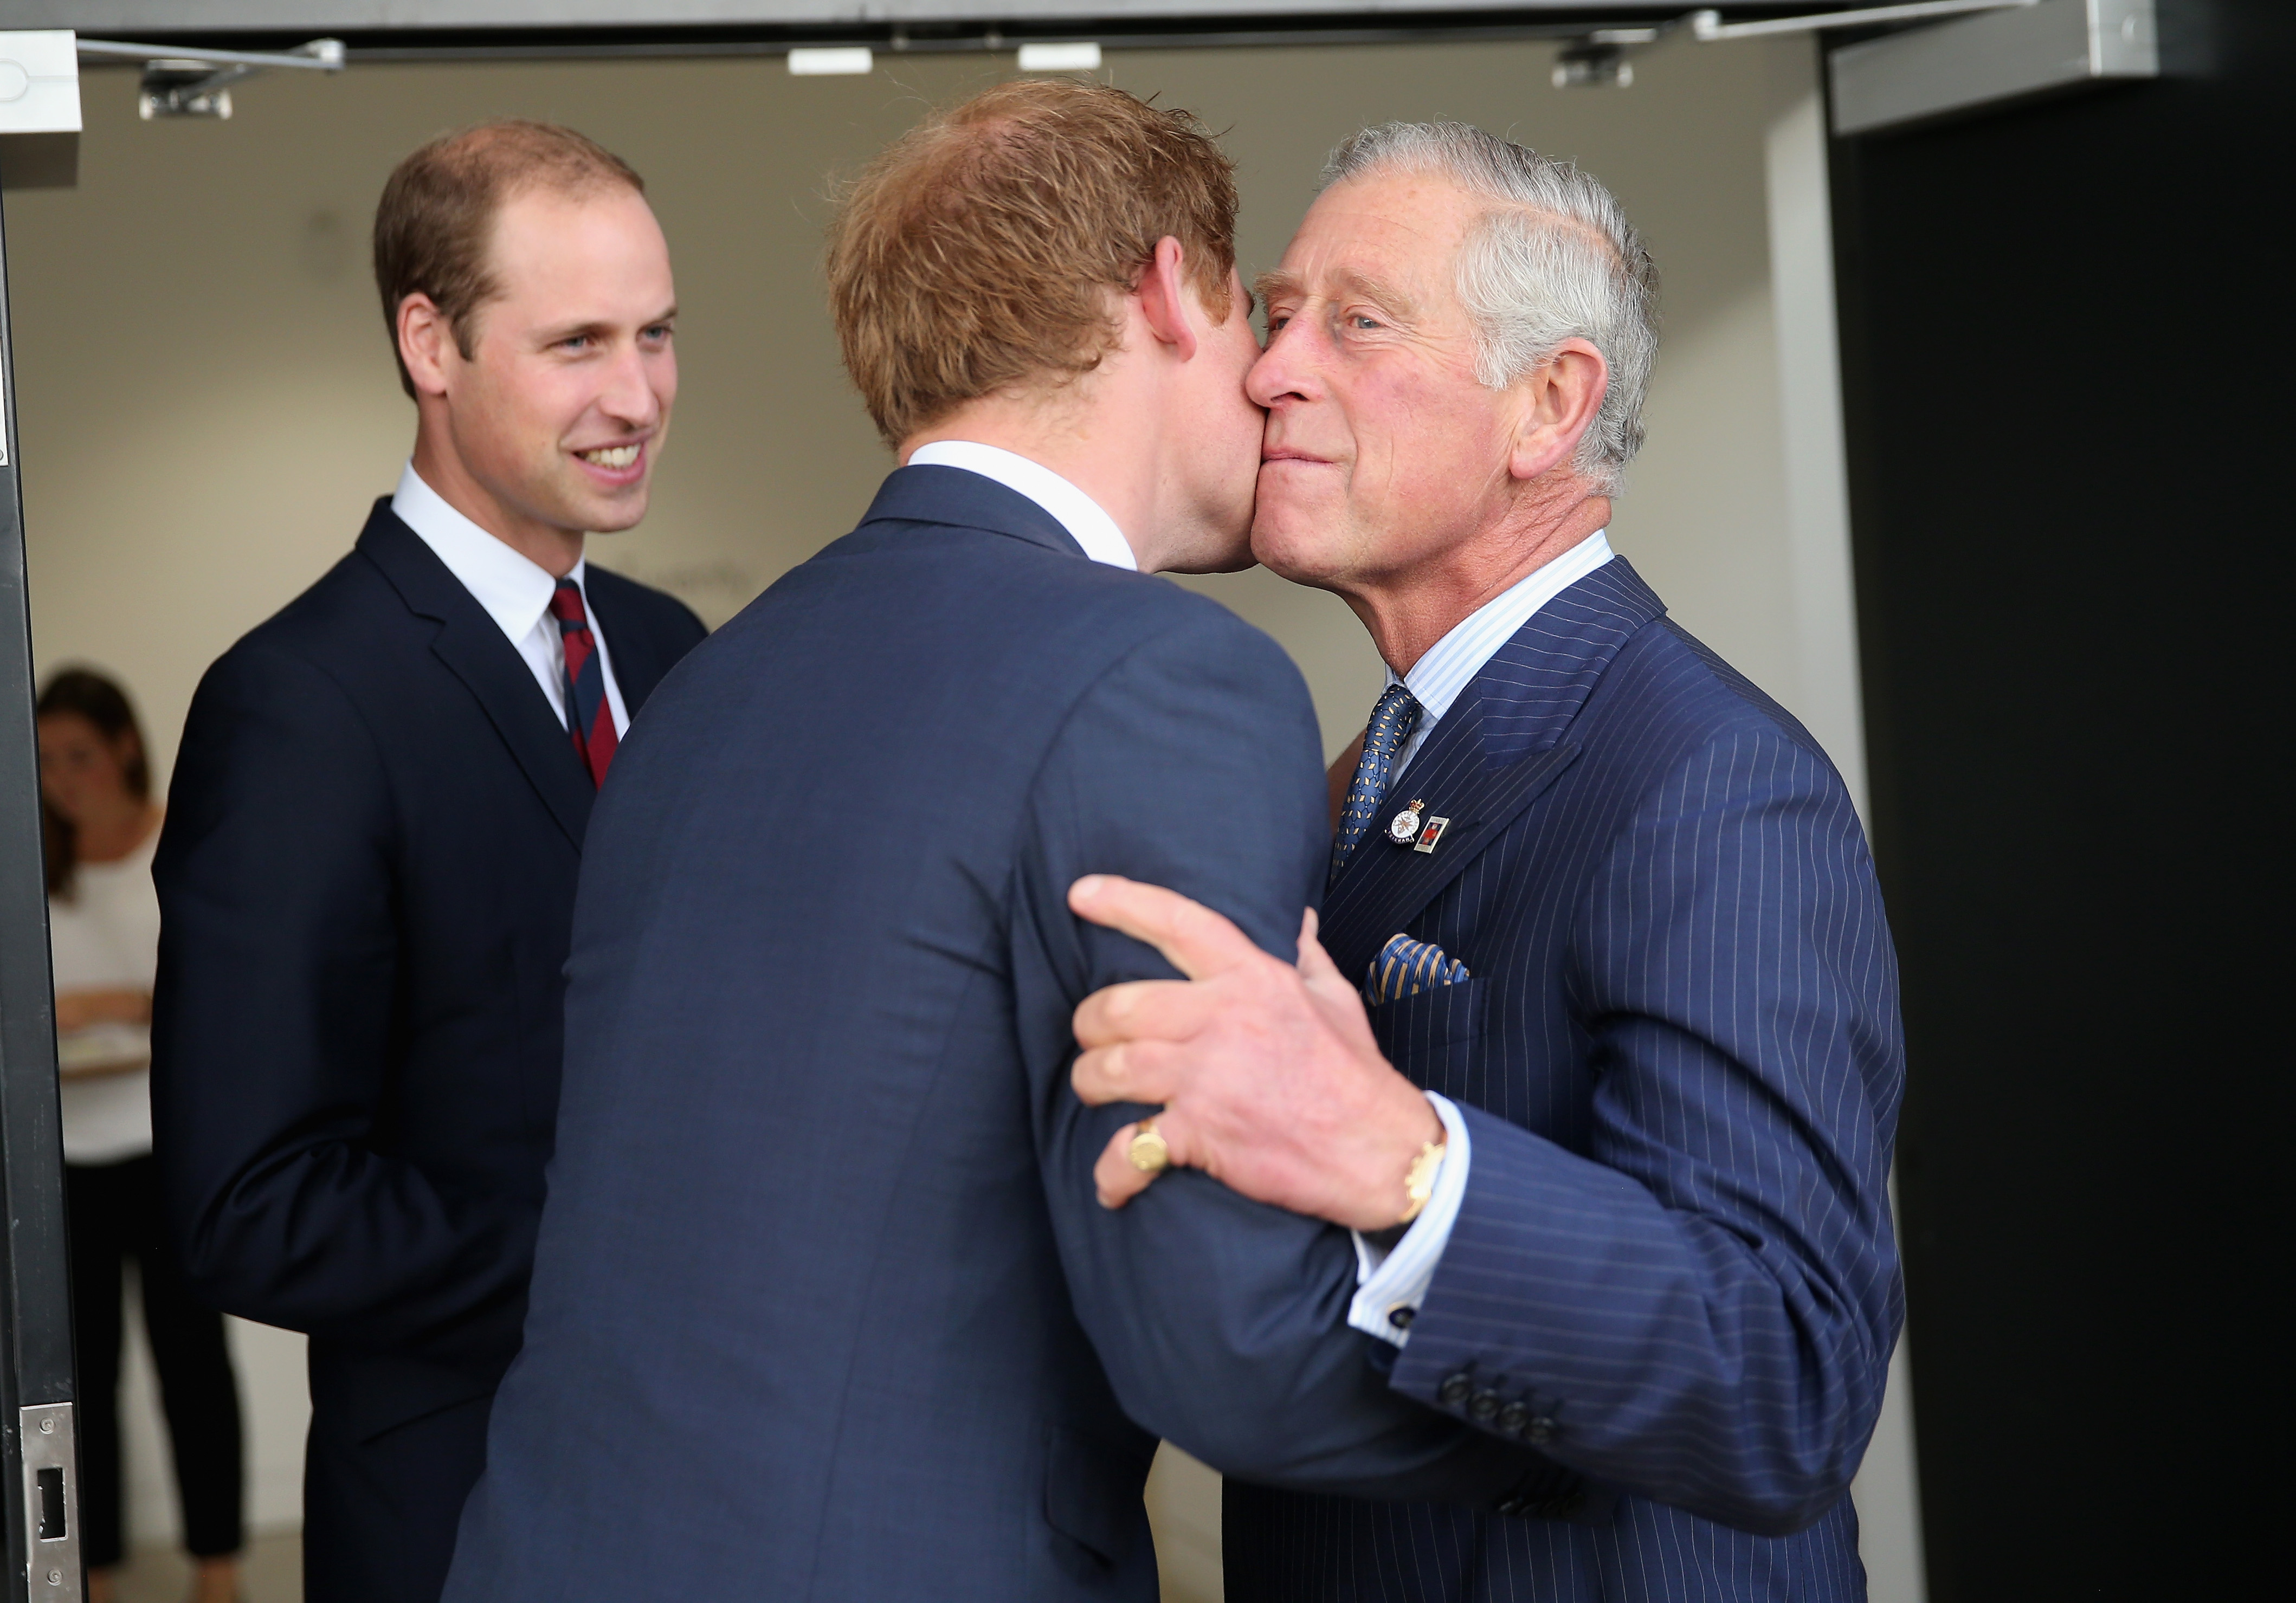 Prince William looks on as Prince Harry kisses their father King Charles III at Queen Elizabeth II Park on September 10, 2014 in London, England. | Source: Getty Images